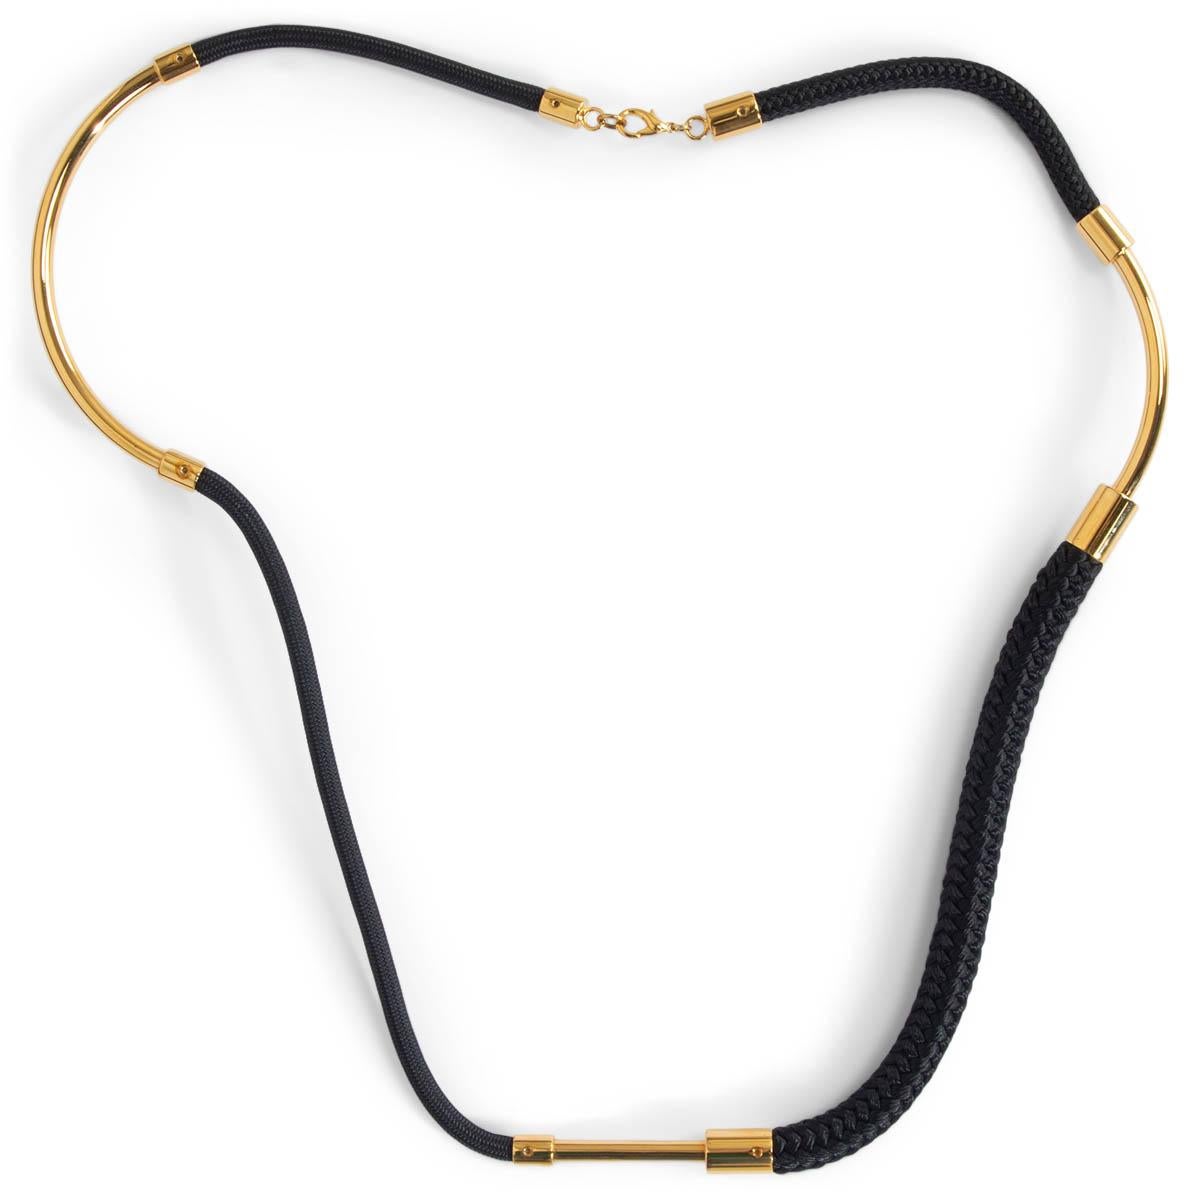 100% authentic Marni necklace in black rope and round gold-tone brass metal details. Has been worn and is in excellent condition. Comes with dust bag. 

Measurements
Length	48cm (18.7in)

All our listings include only the listed item unless